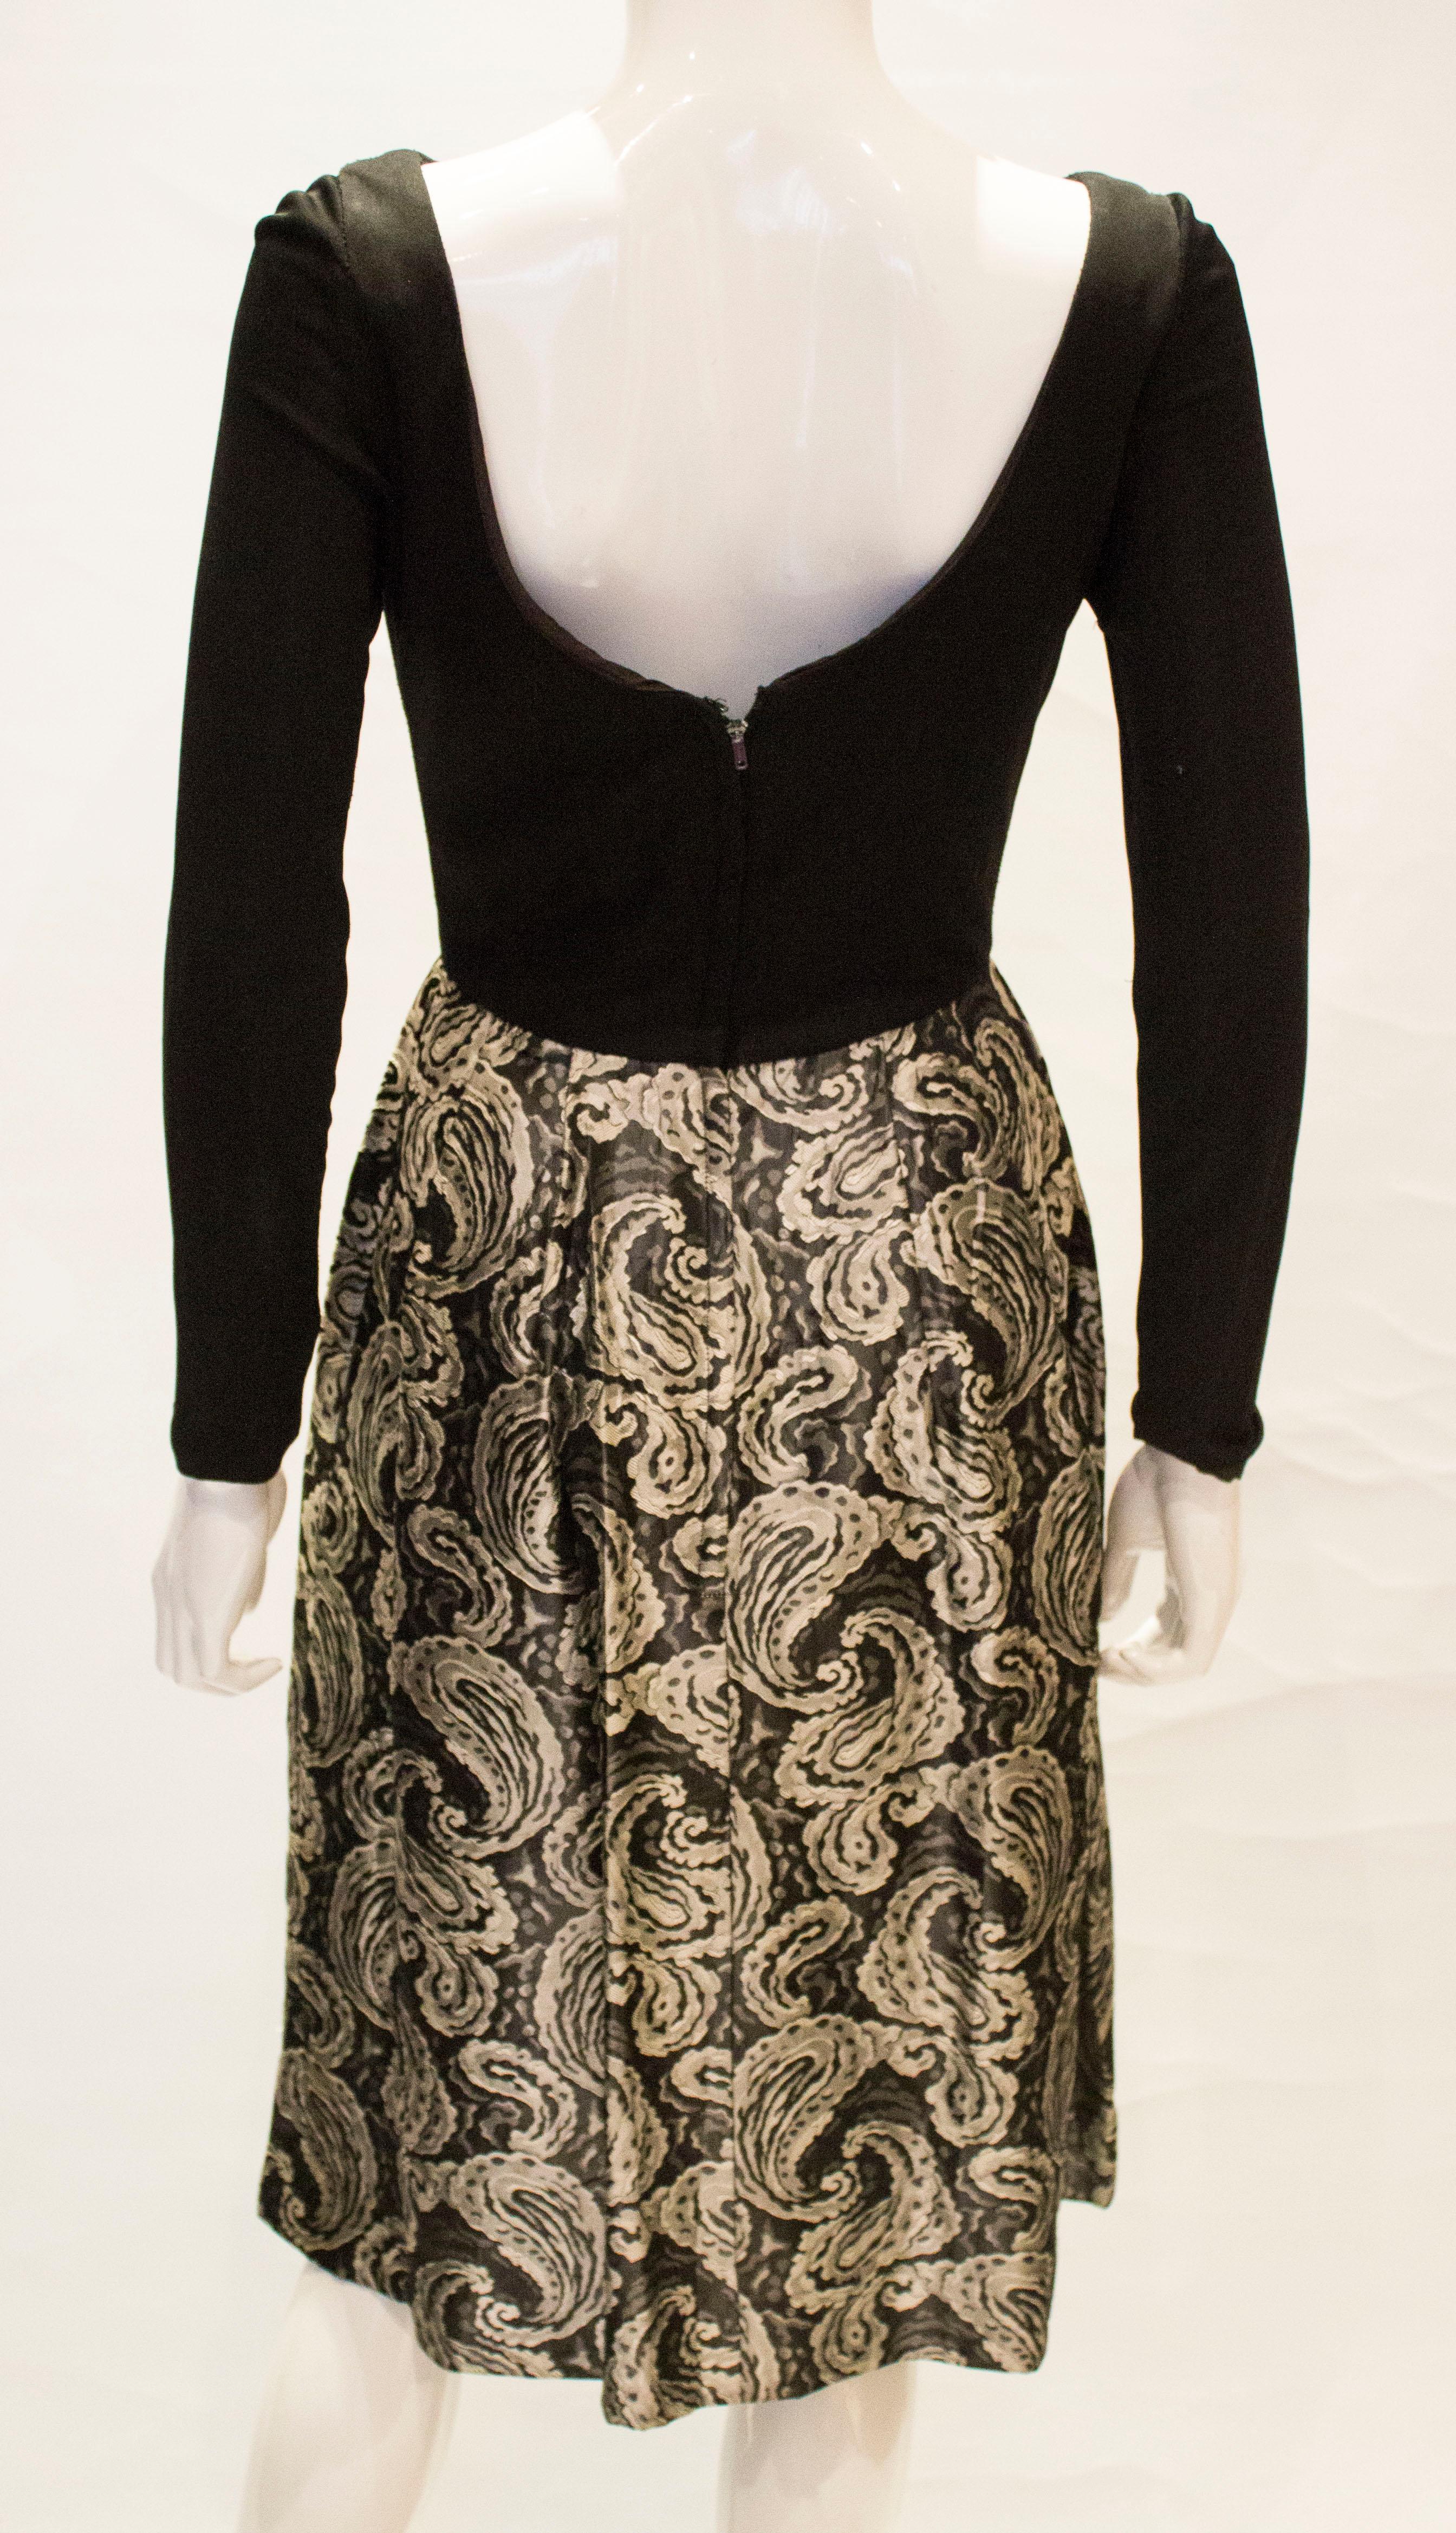 Women's A vintage 1950s silver and black brocade party low back paisley dress small